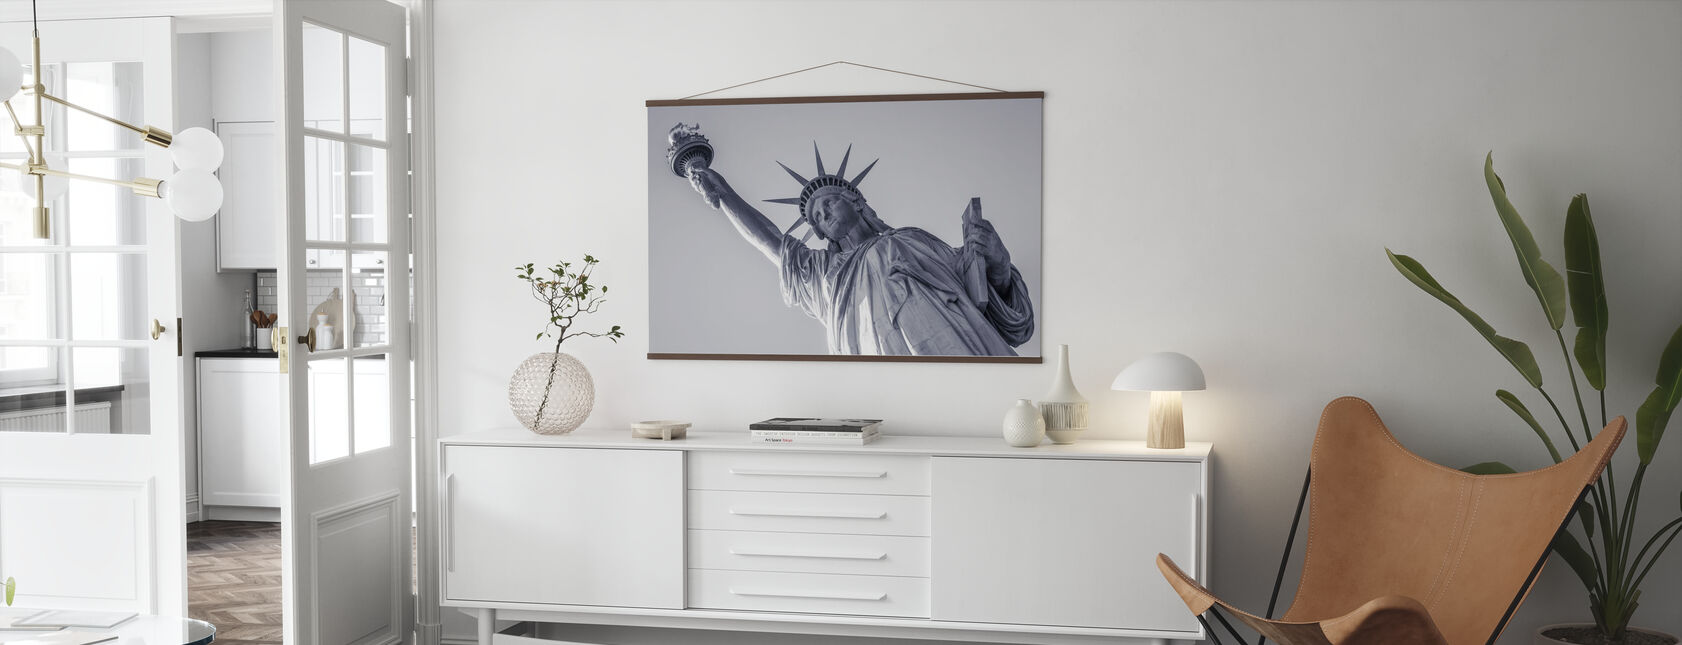 Statue of Liberty - Poster - Living Room